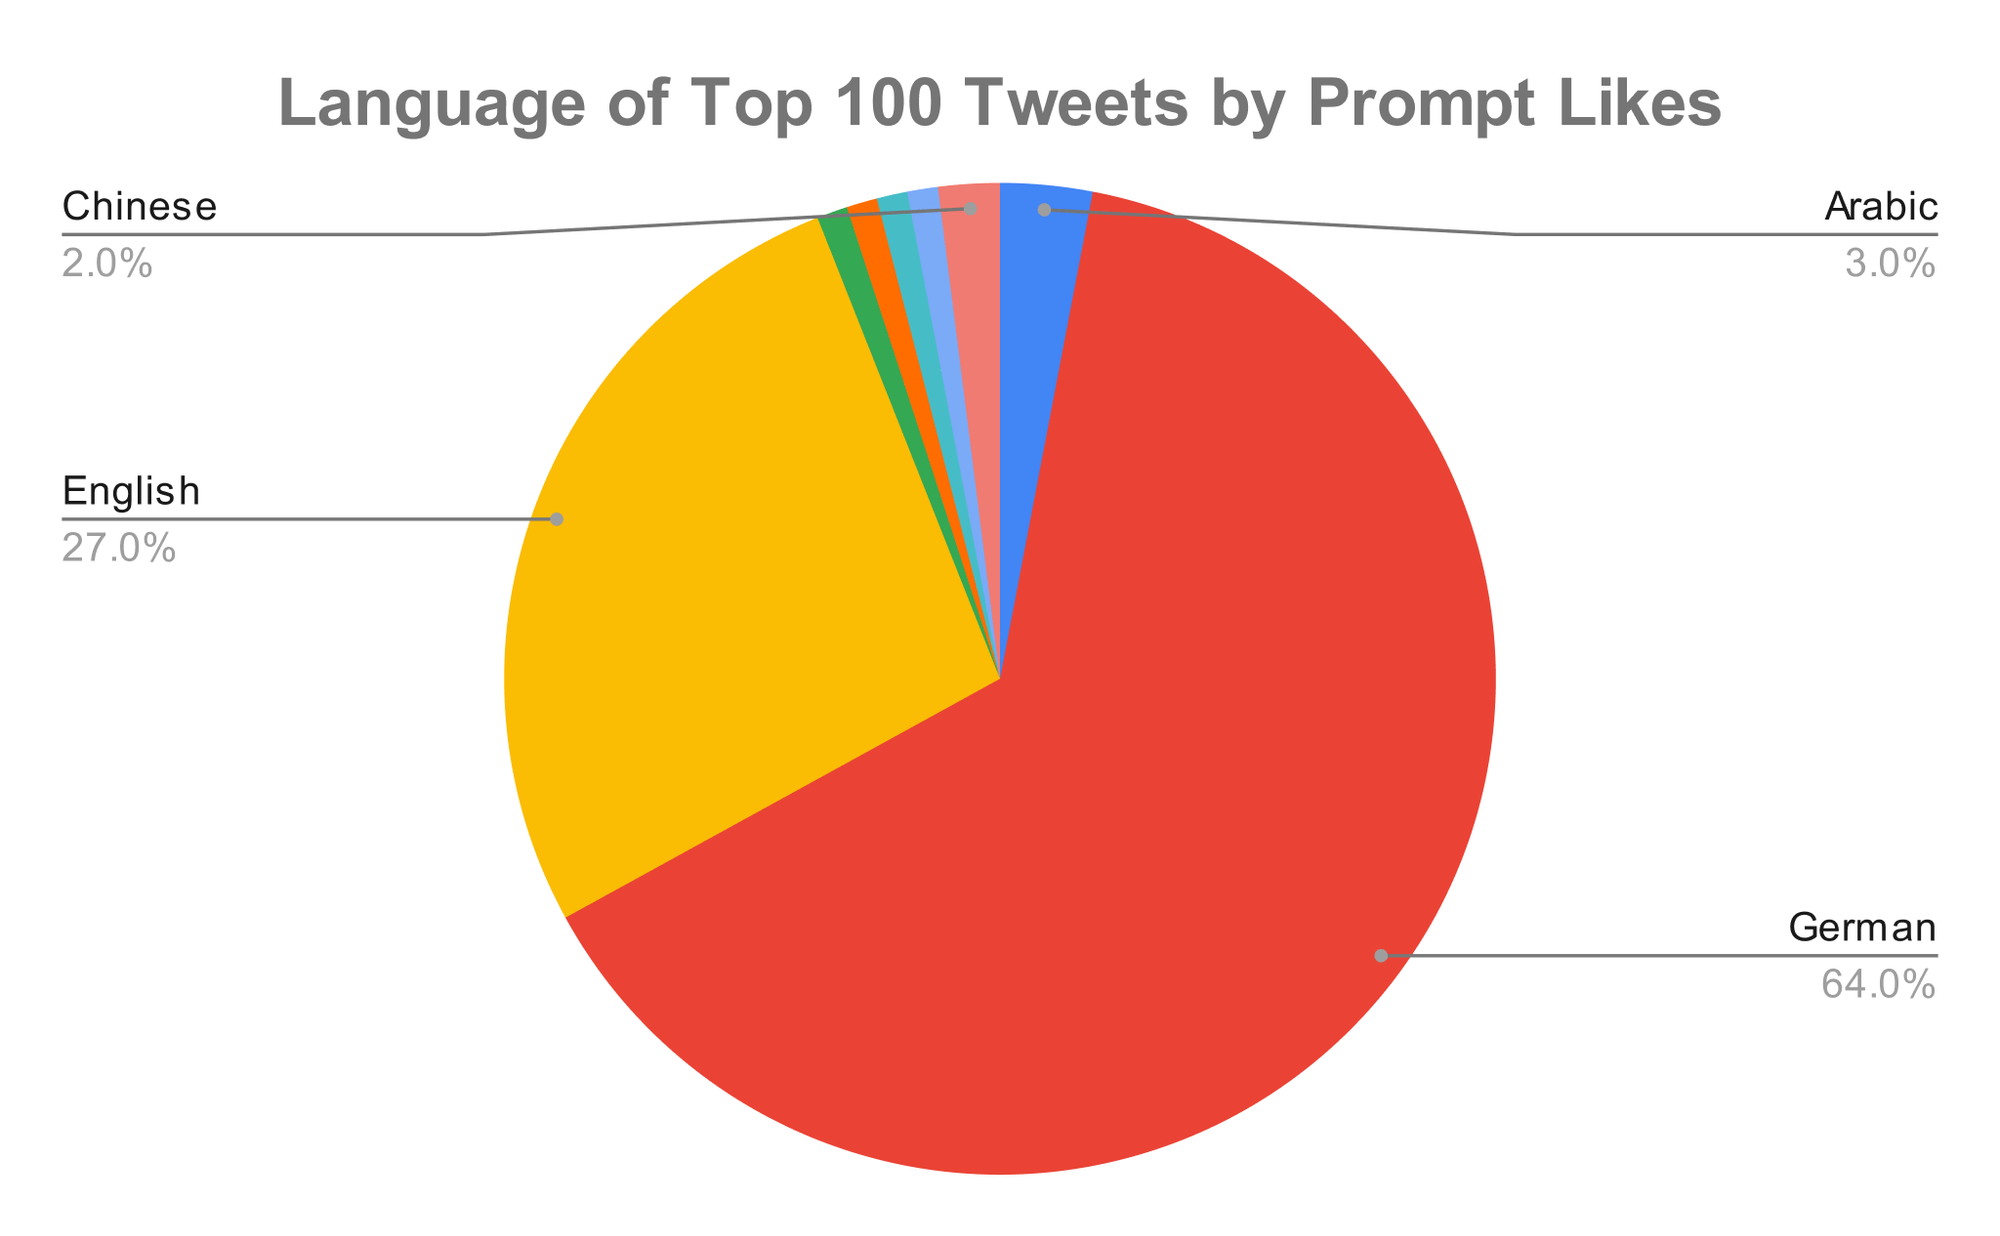 A language breakdown of the top 100 tweet prompts mentioning @ChatGPTBot (ranked by the number of likes the prompt tweet received).